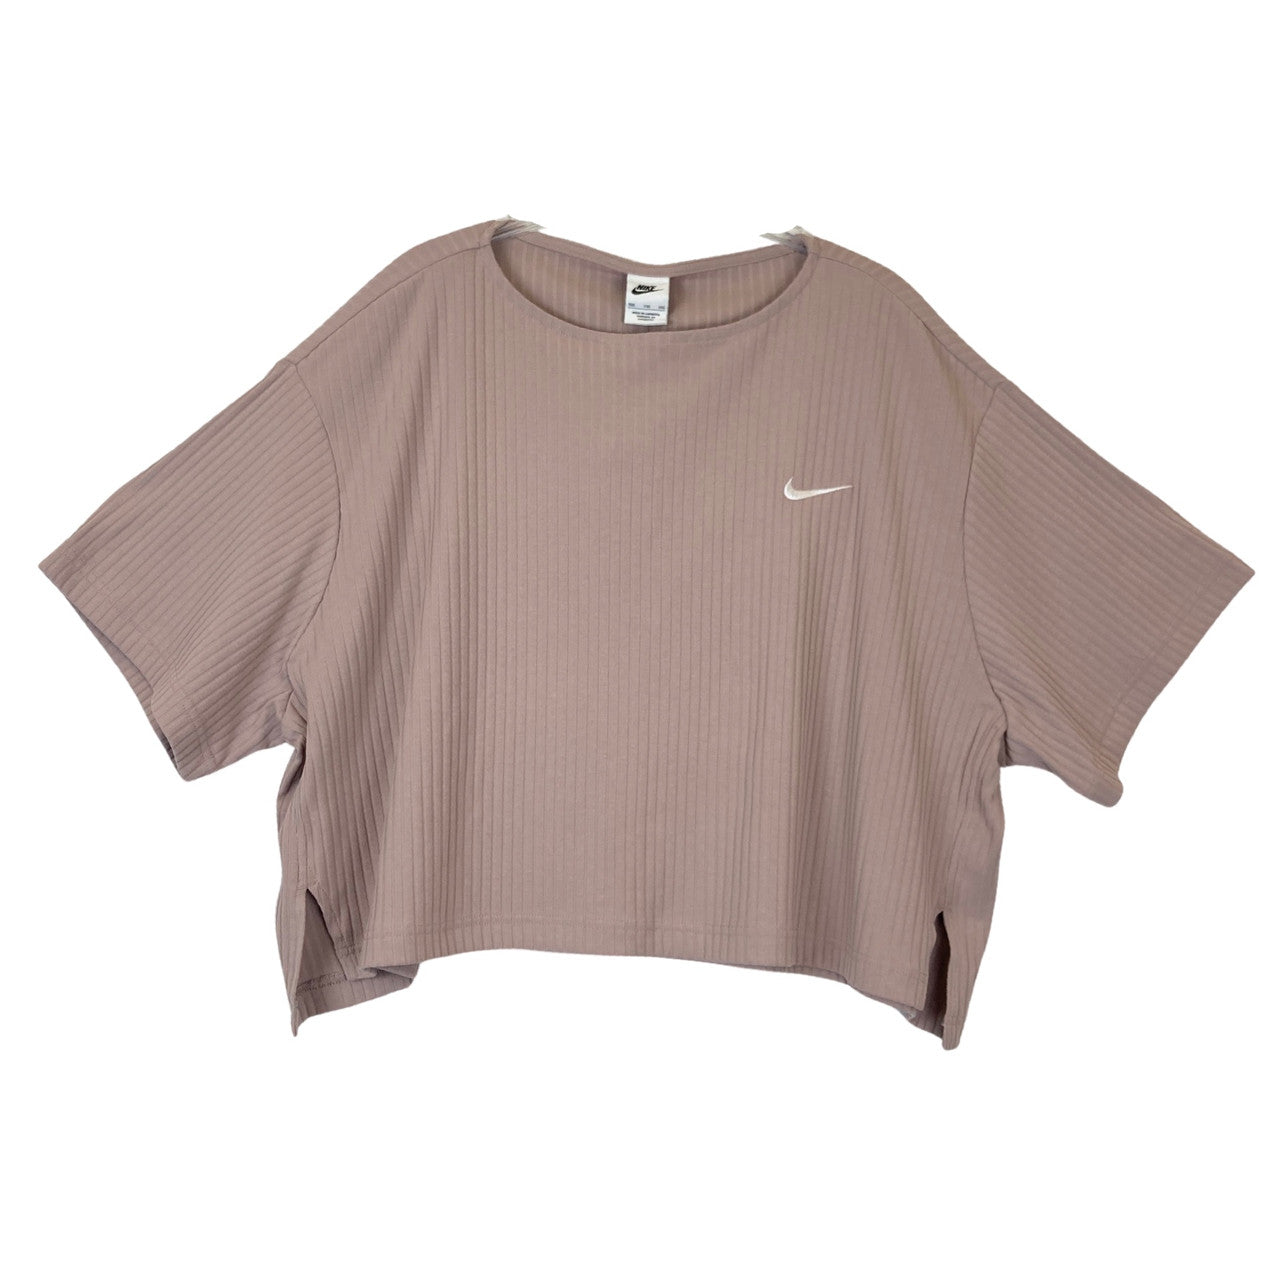 Nike Oversized Cropped Ribbed T Shirt-tan front